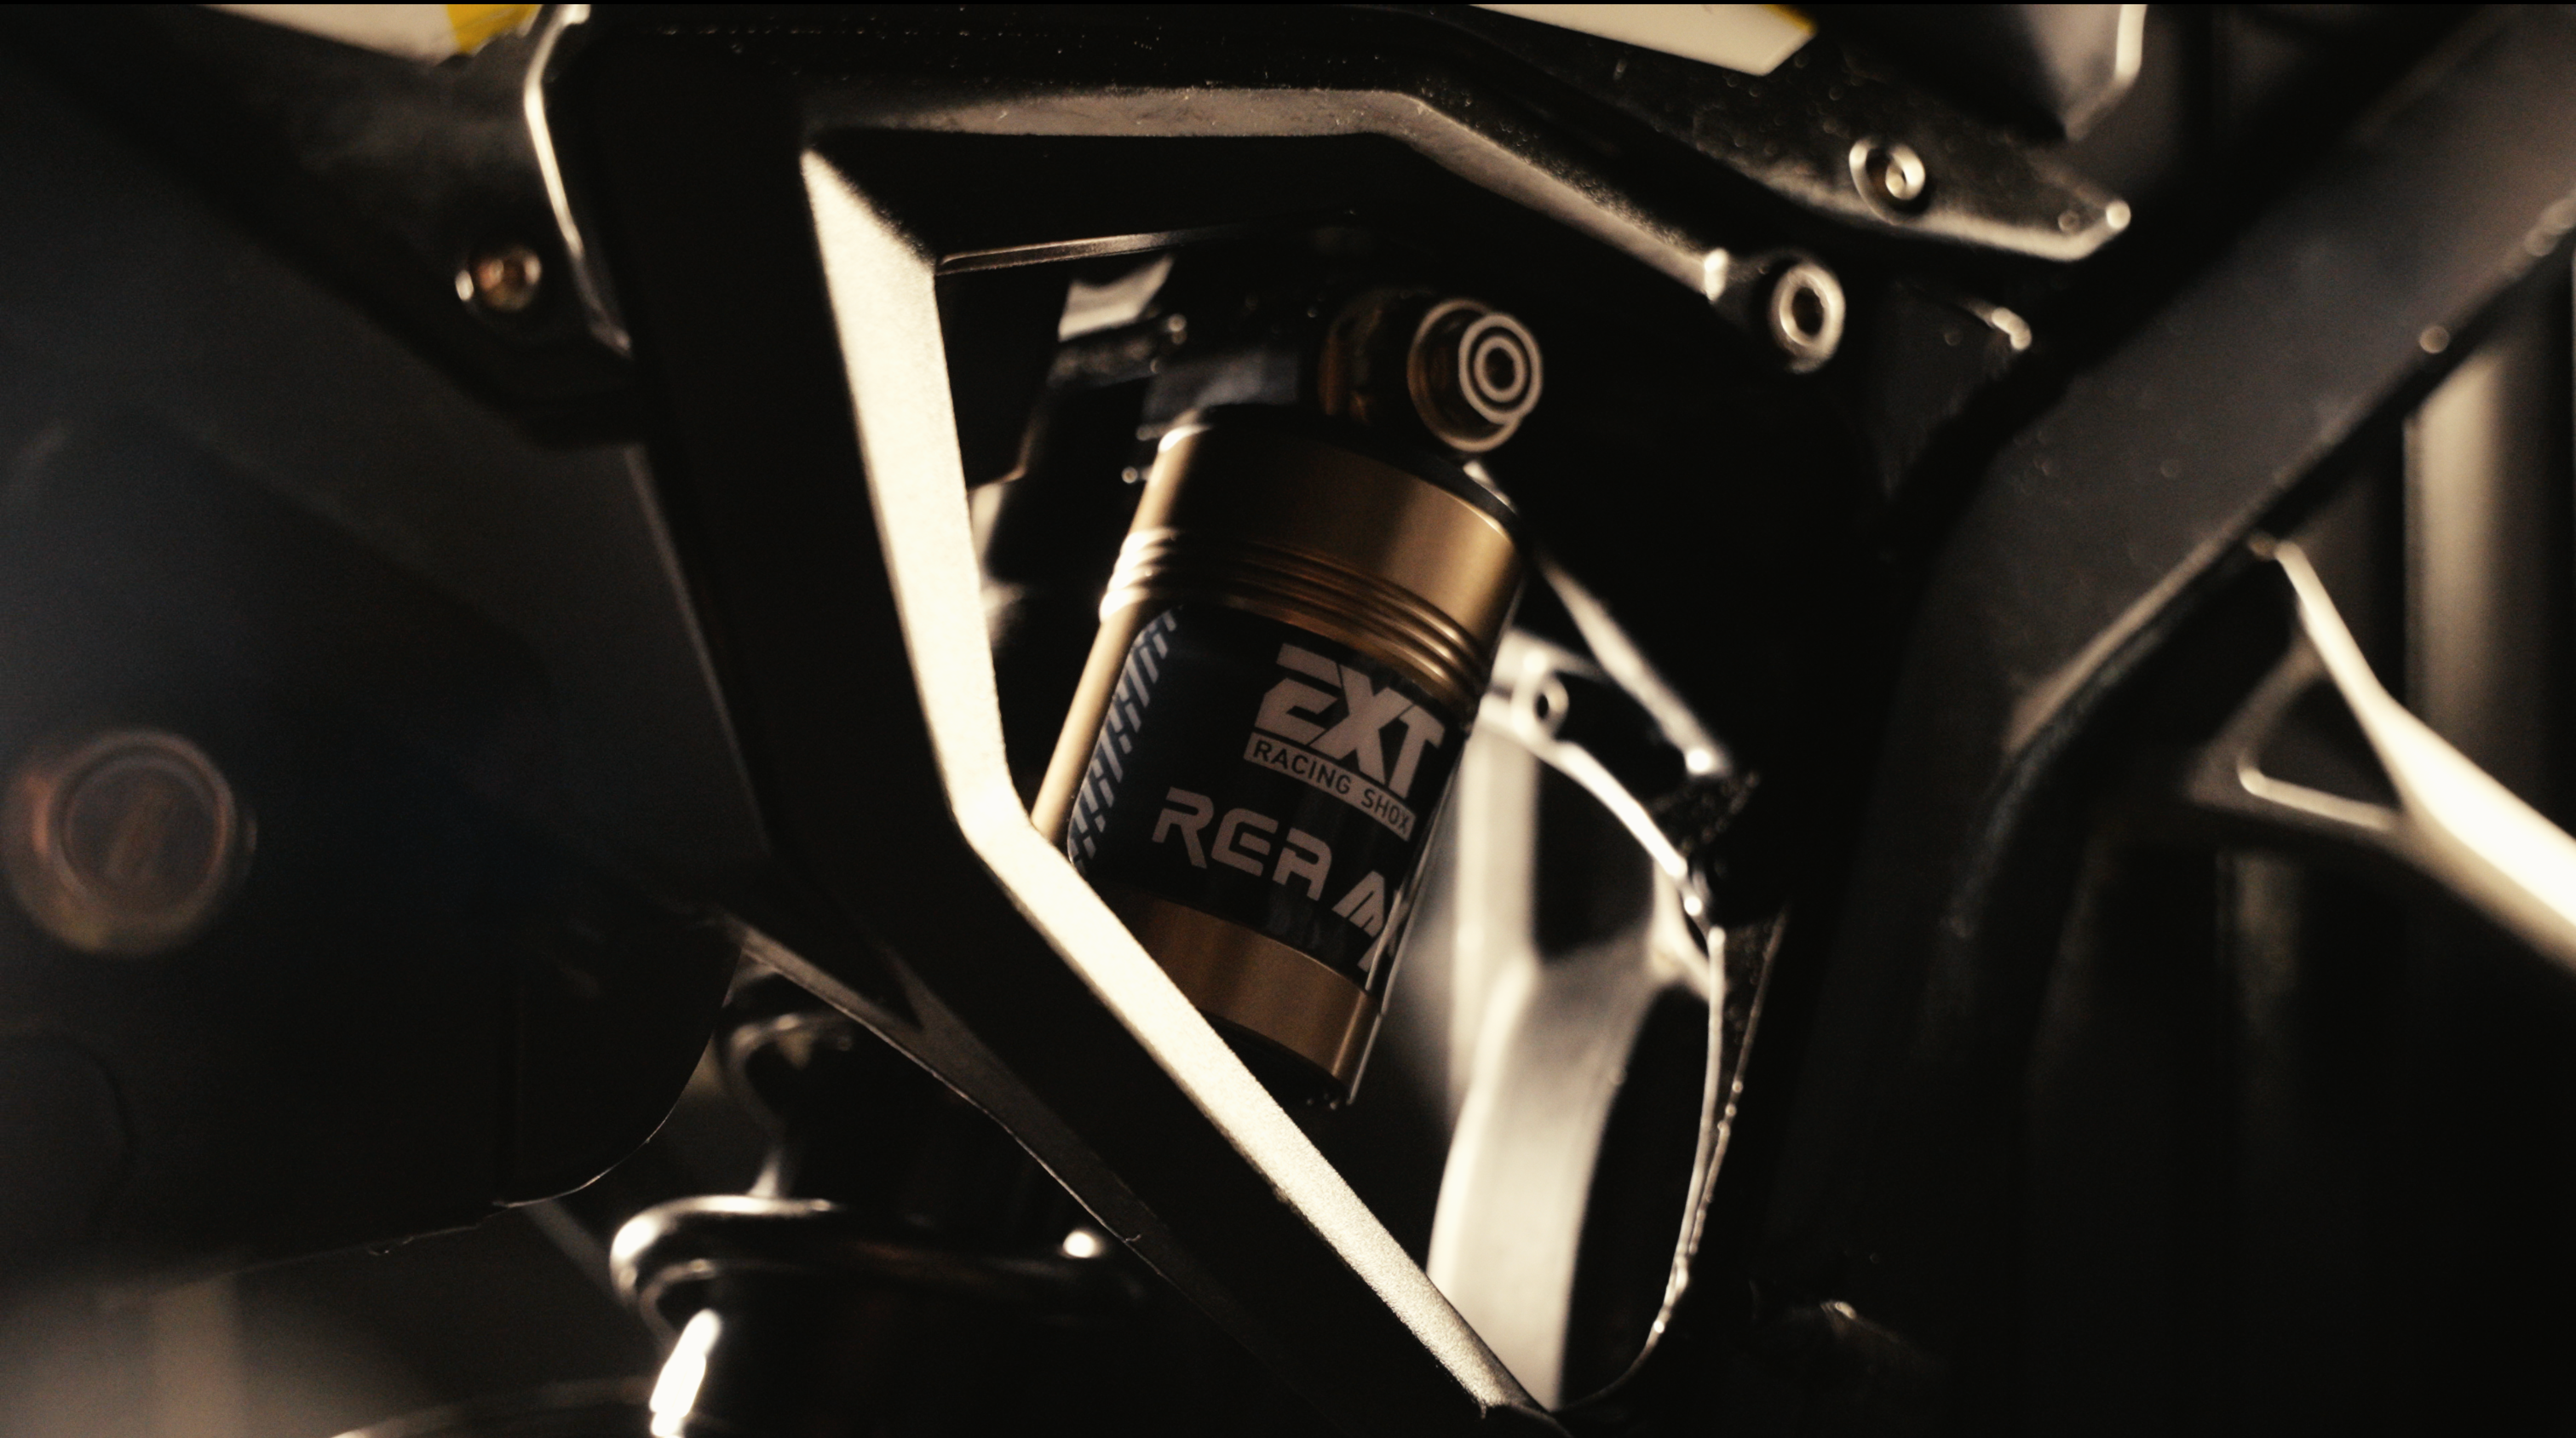 EXT Rea MX Rear Shock for Surron Ultra Bee